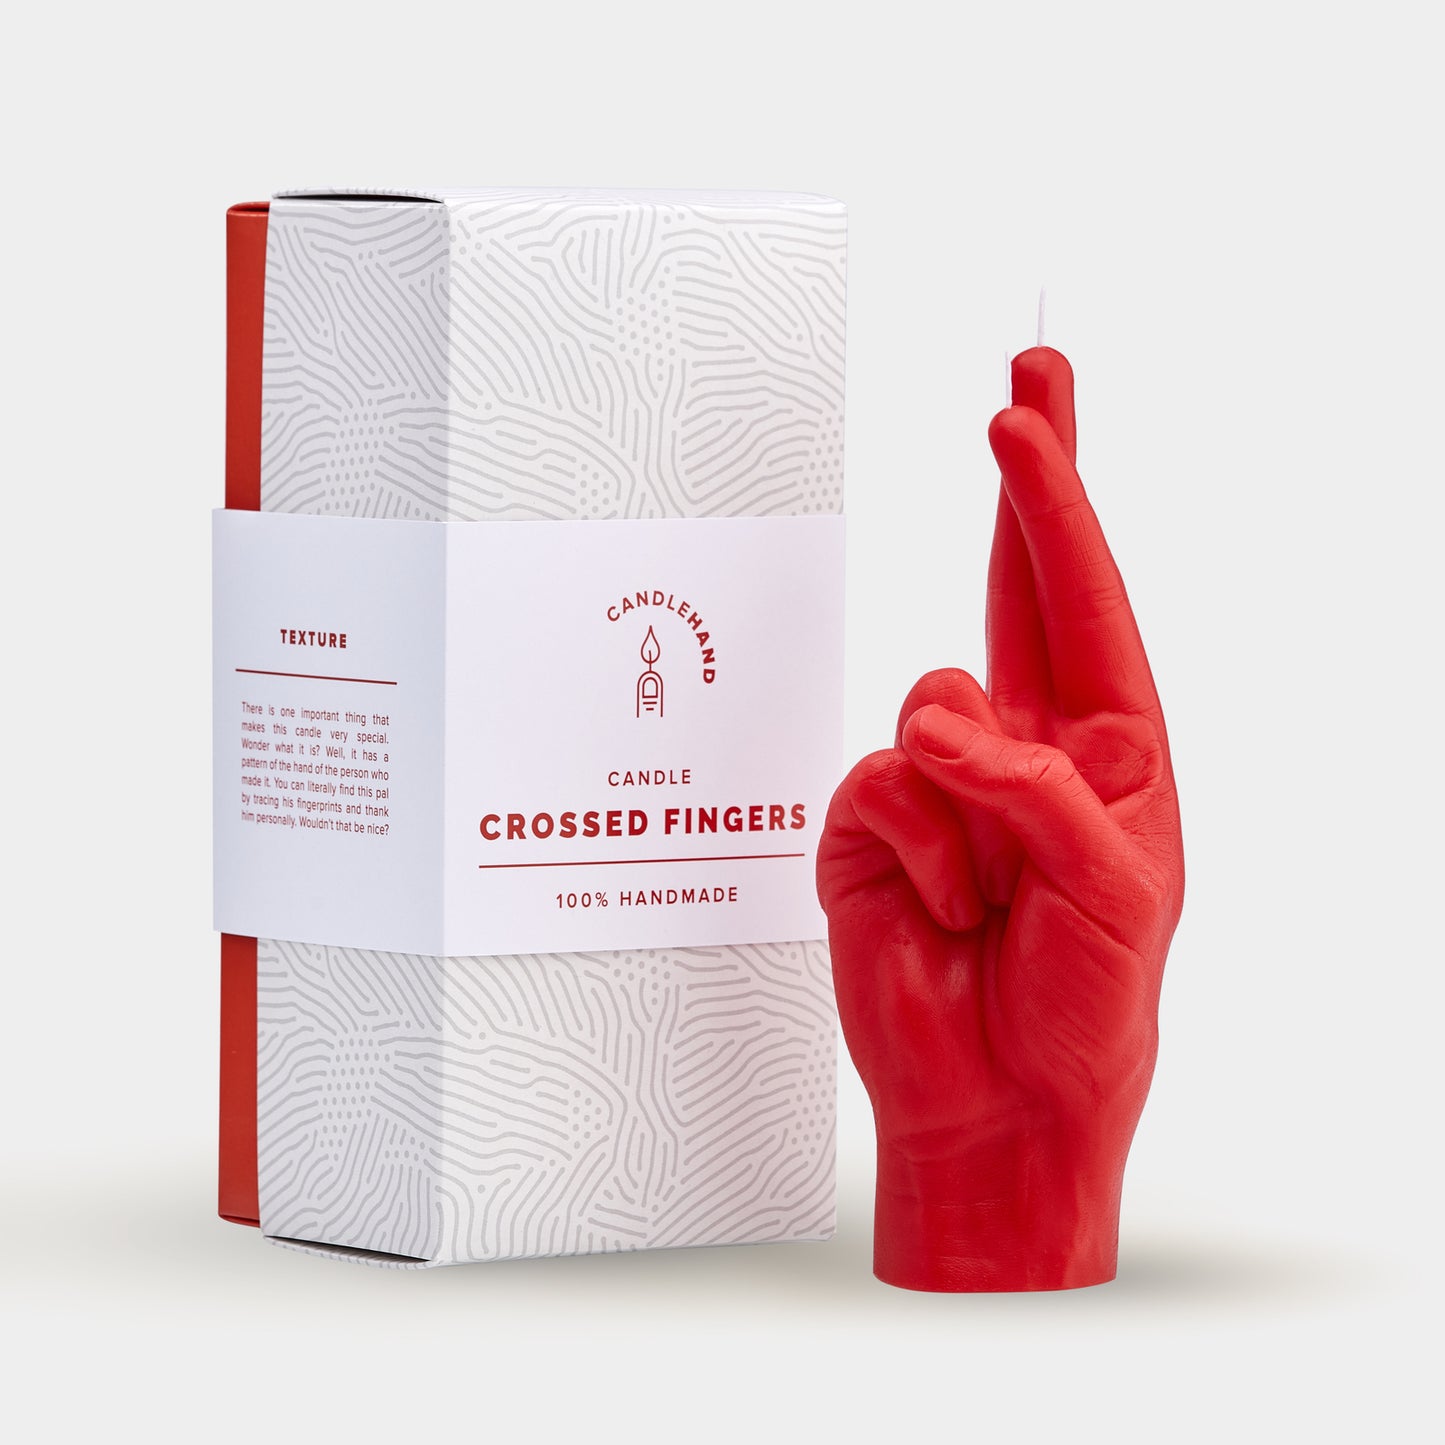 "Crossed Fingers" Hand Gesture Candle